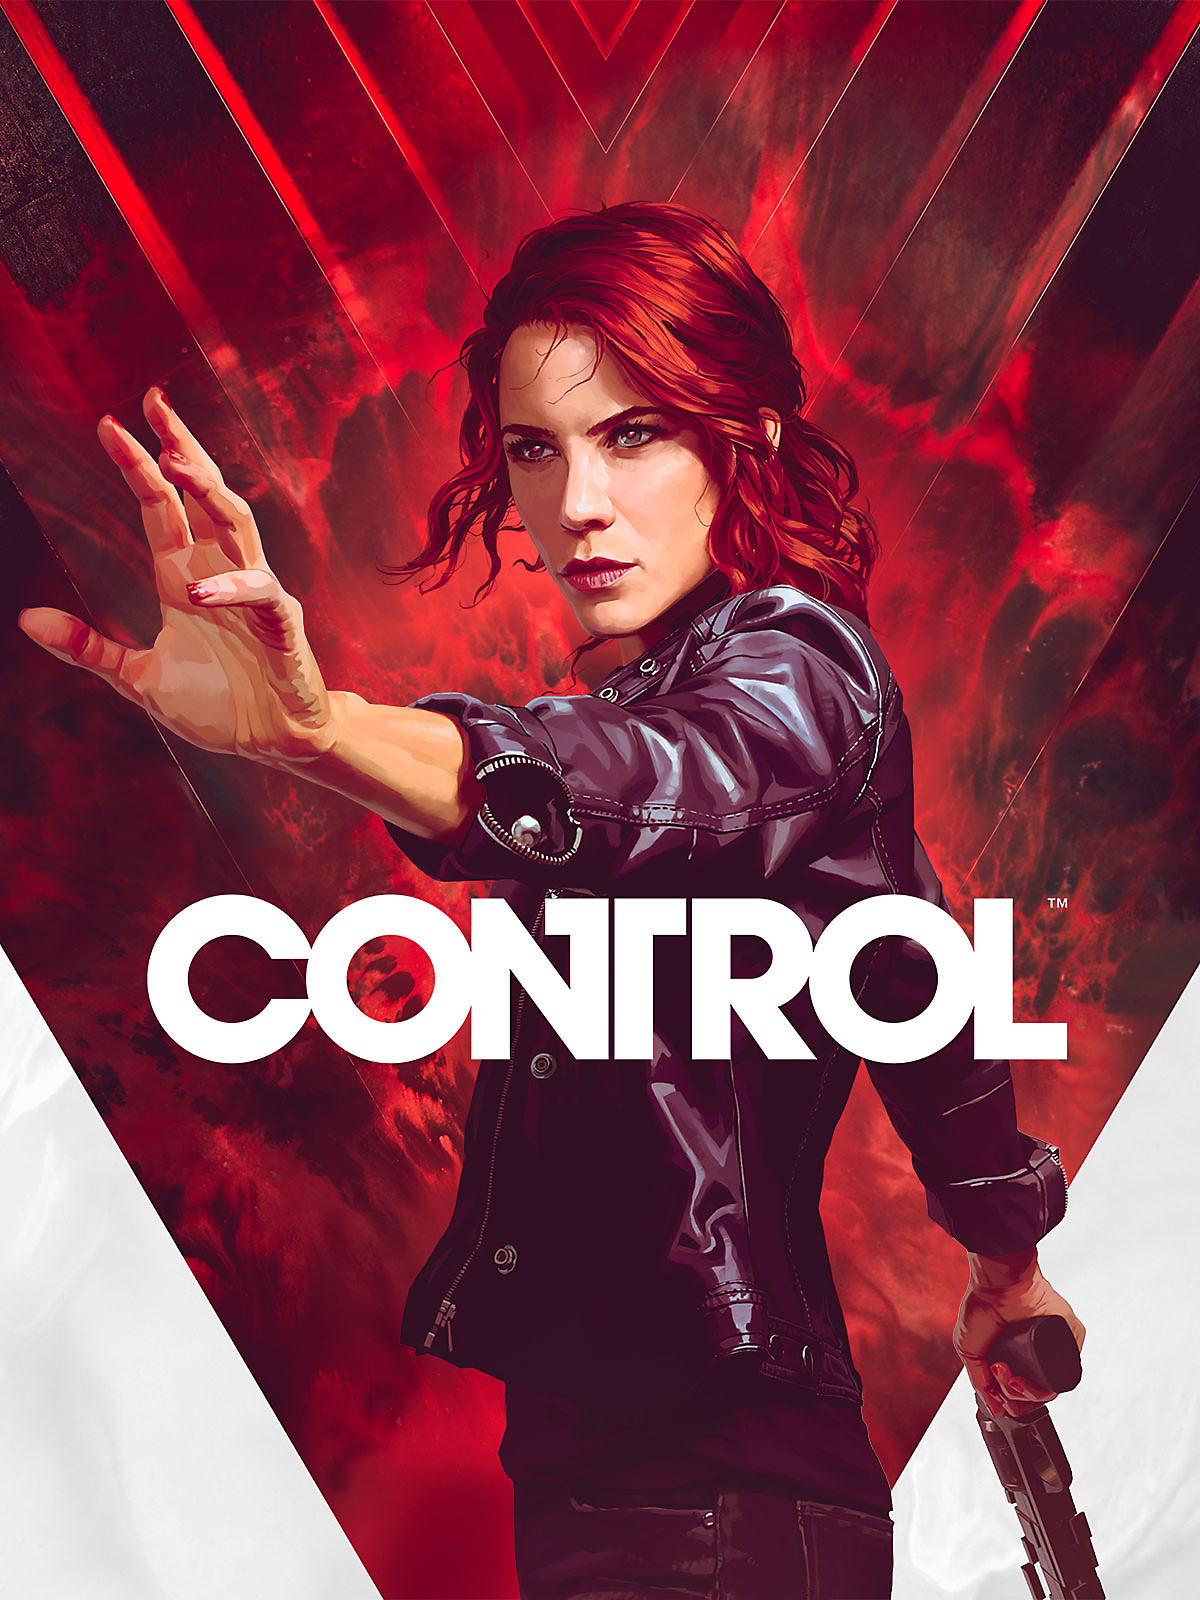 control-poster-01-ps4-us-11sep19